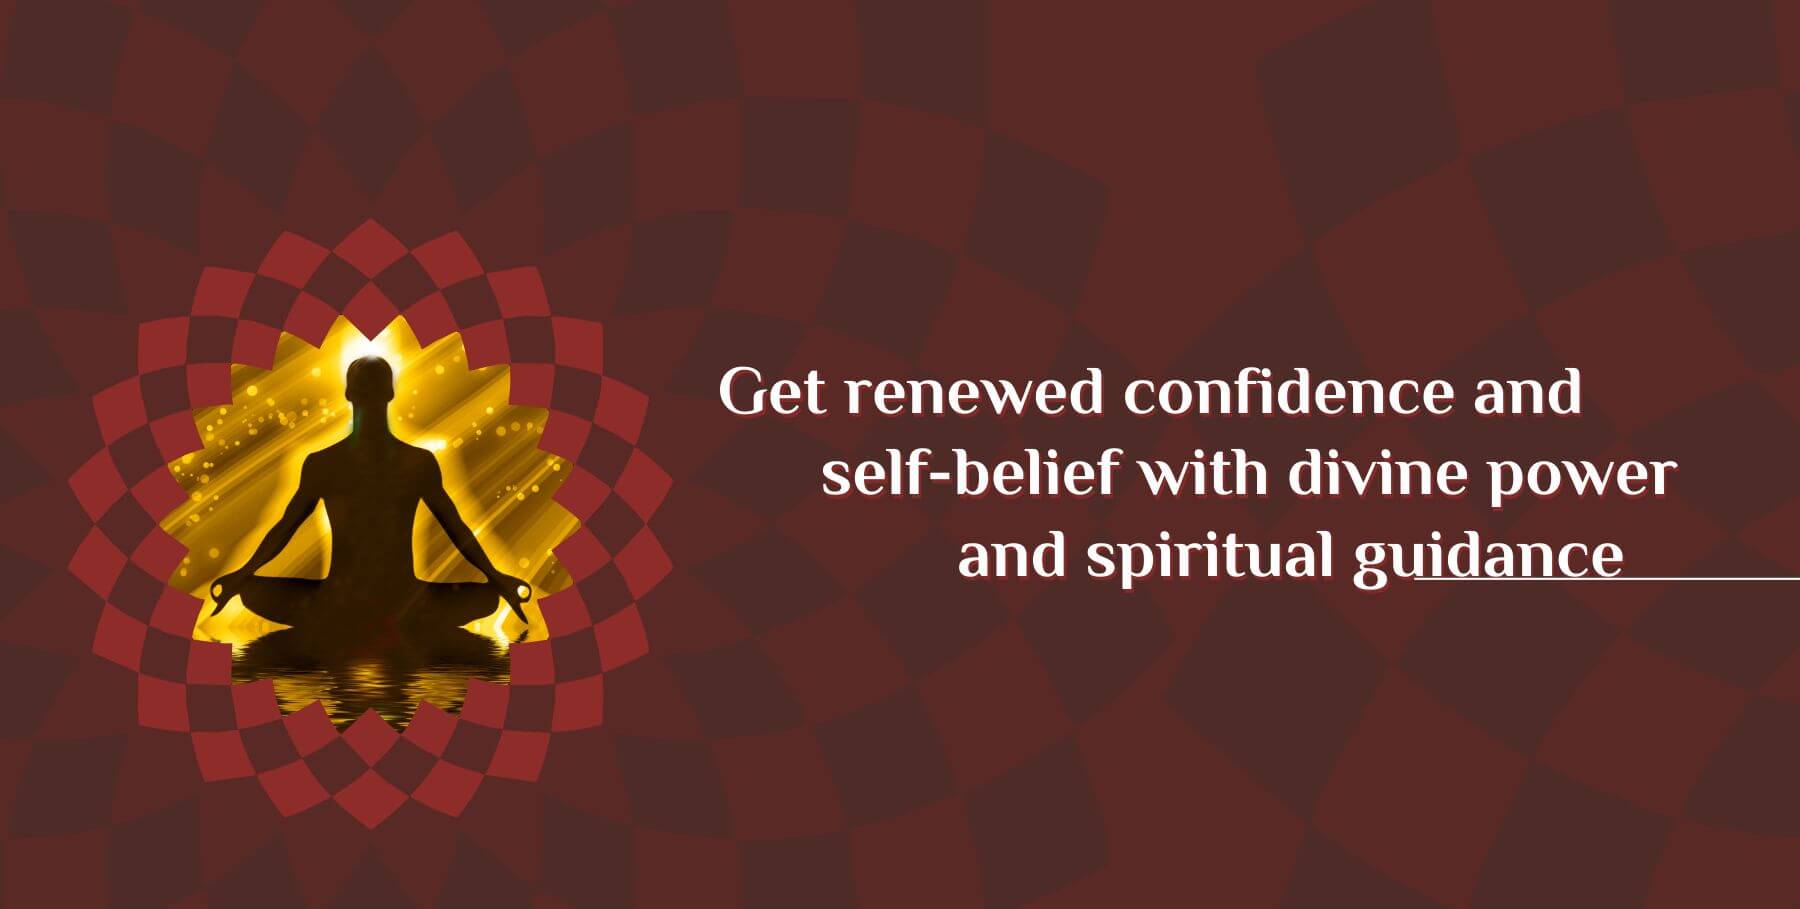 Get renewed confidence and self-belief with divine power and spiritual guidance